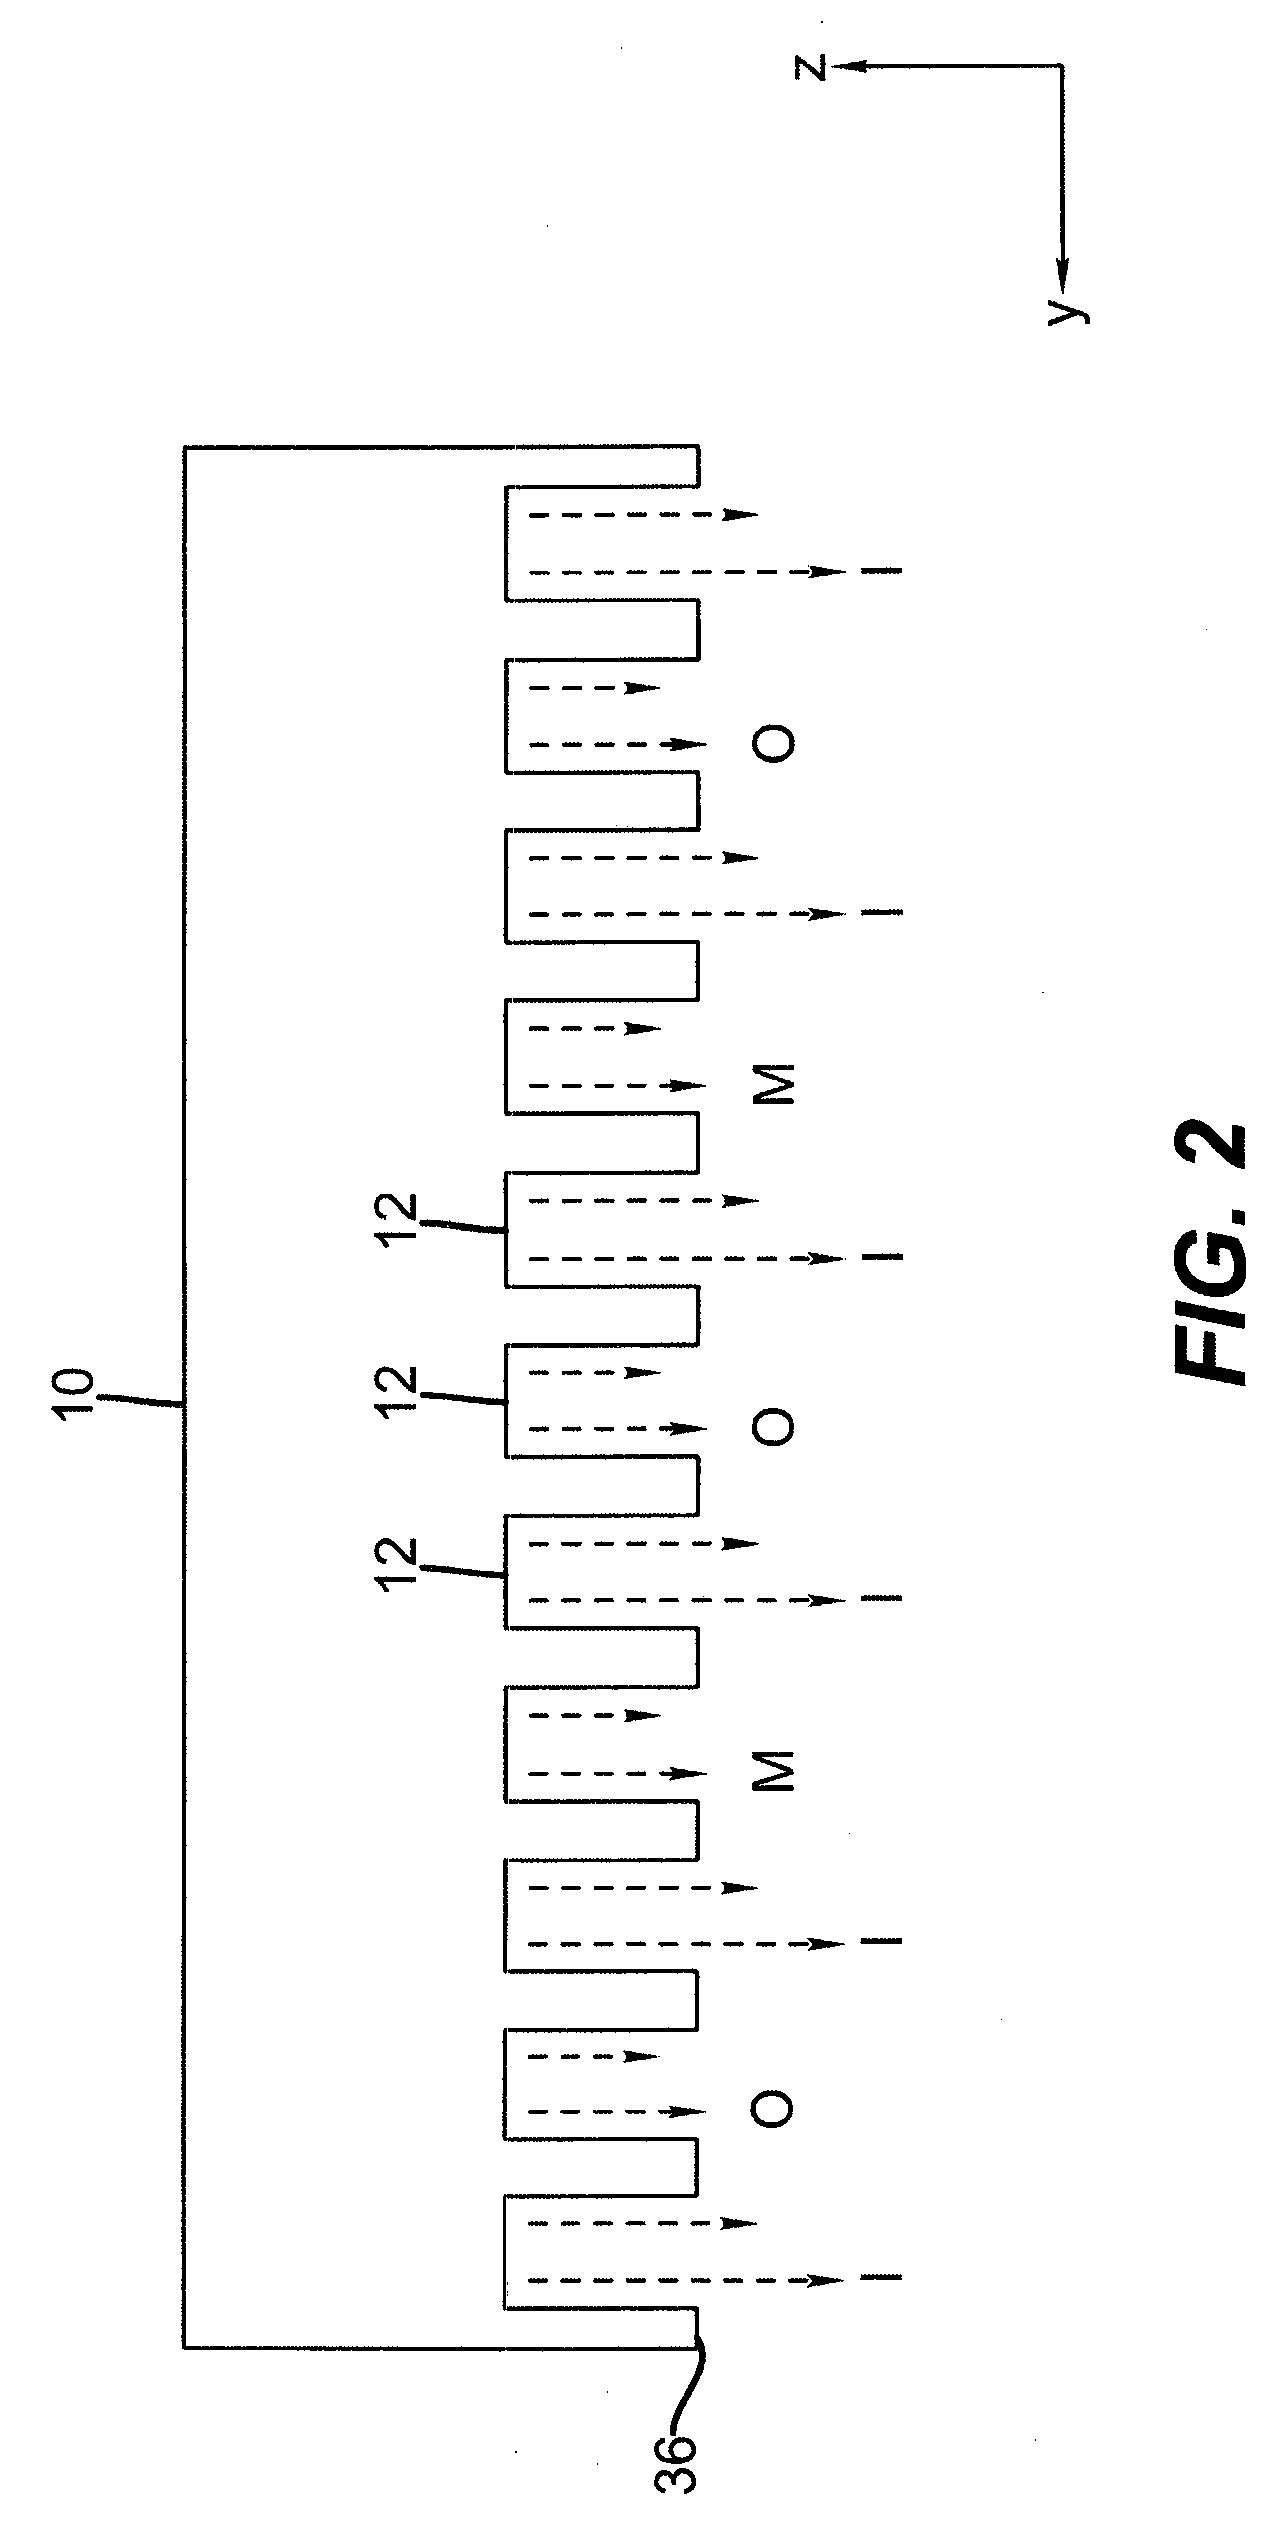 OLED display encapsulation with the optical property